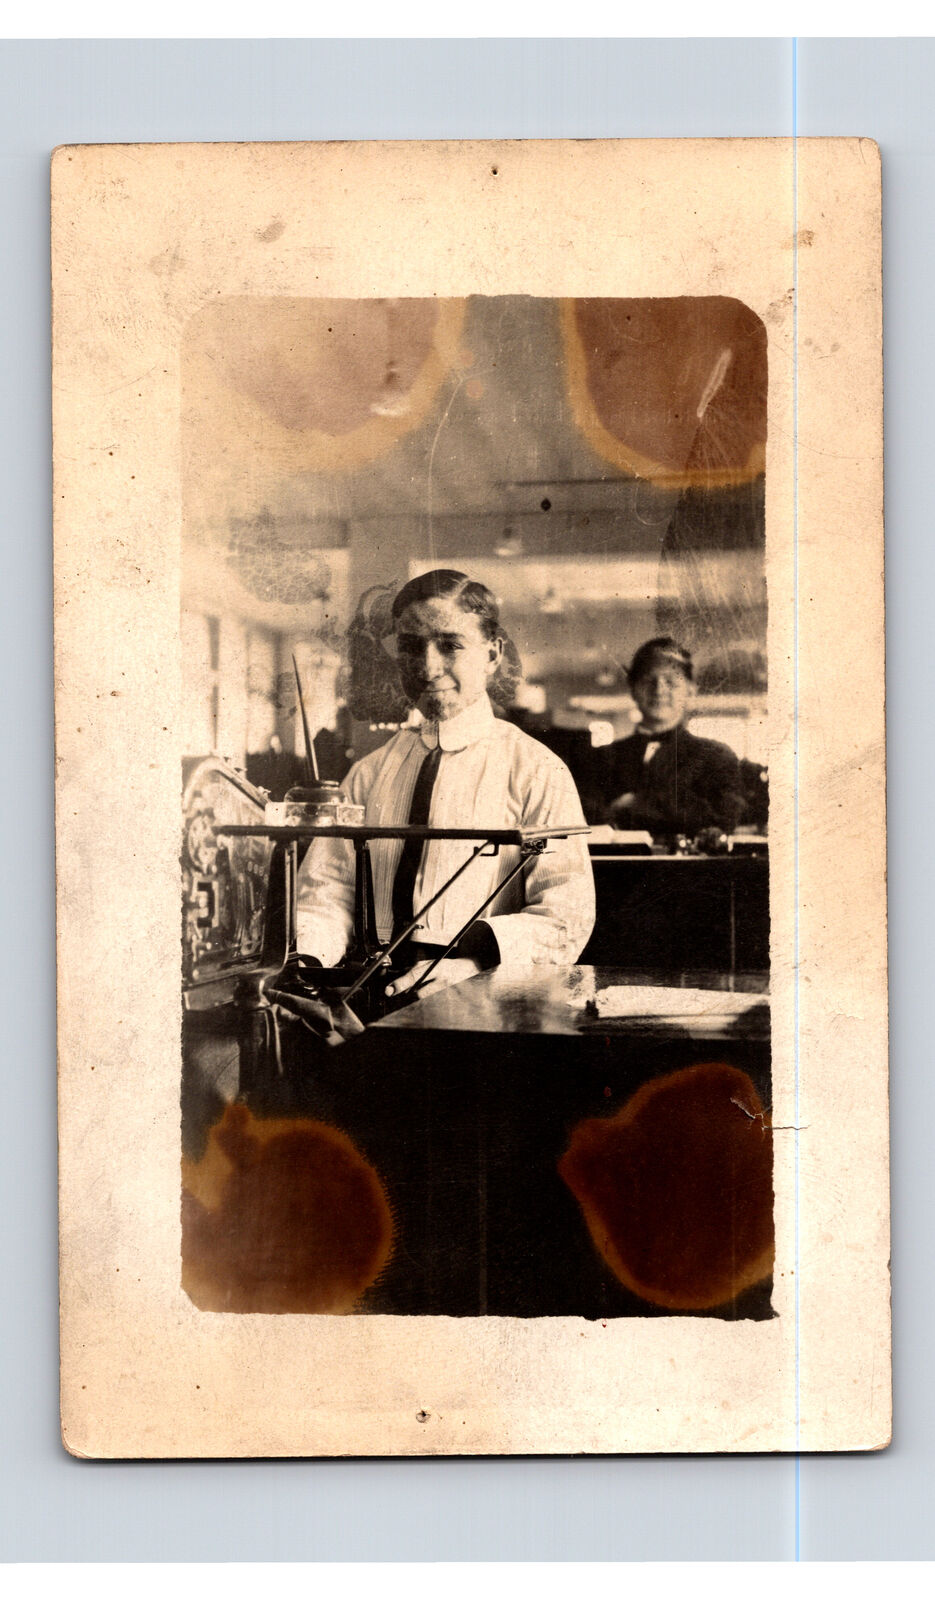 RPPC Occupational Photo of Man & Woman Workers Postcard